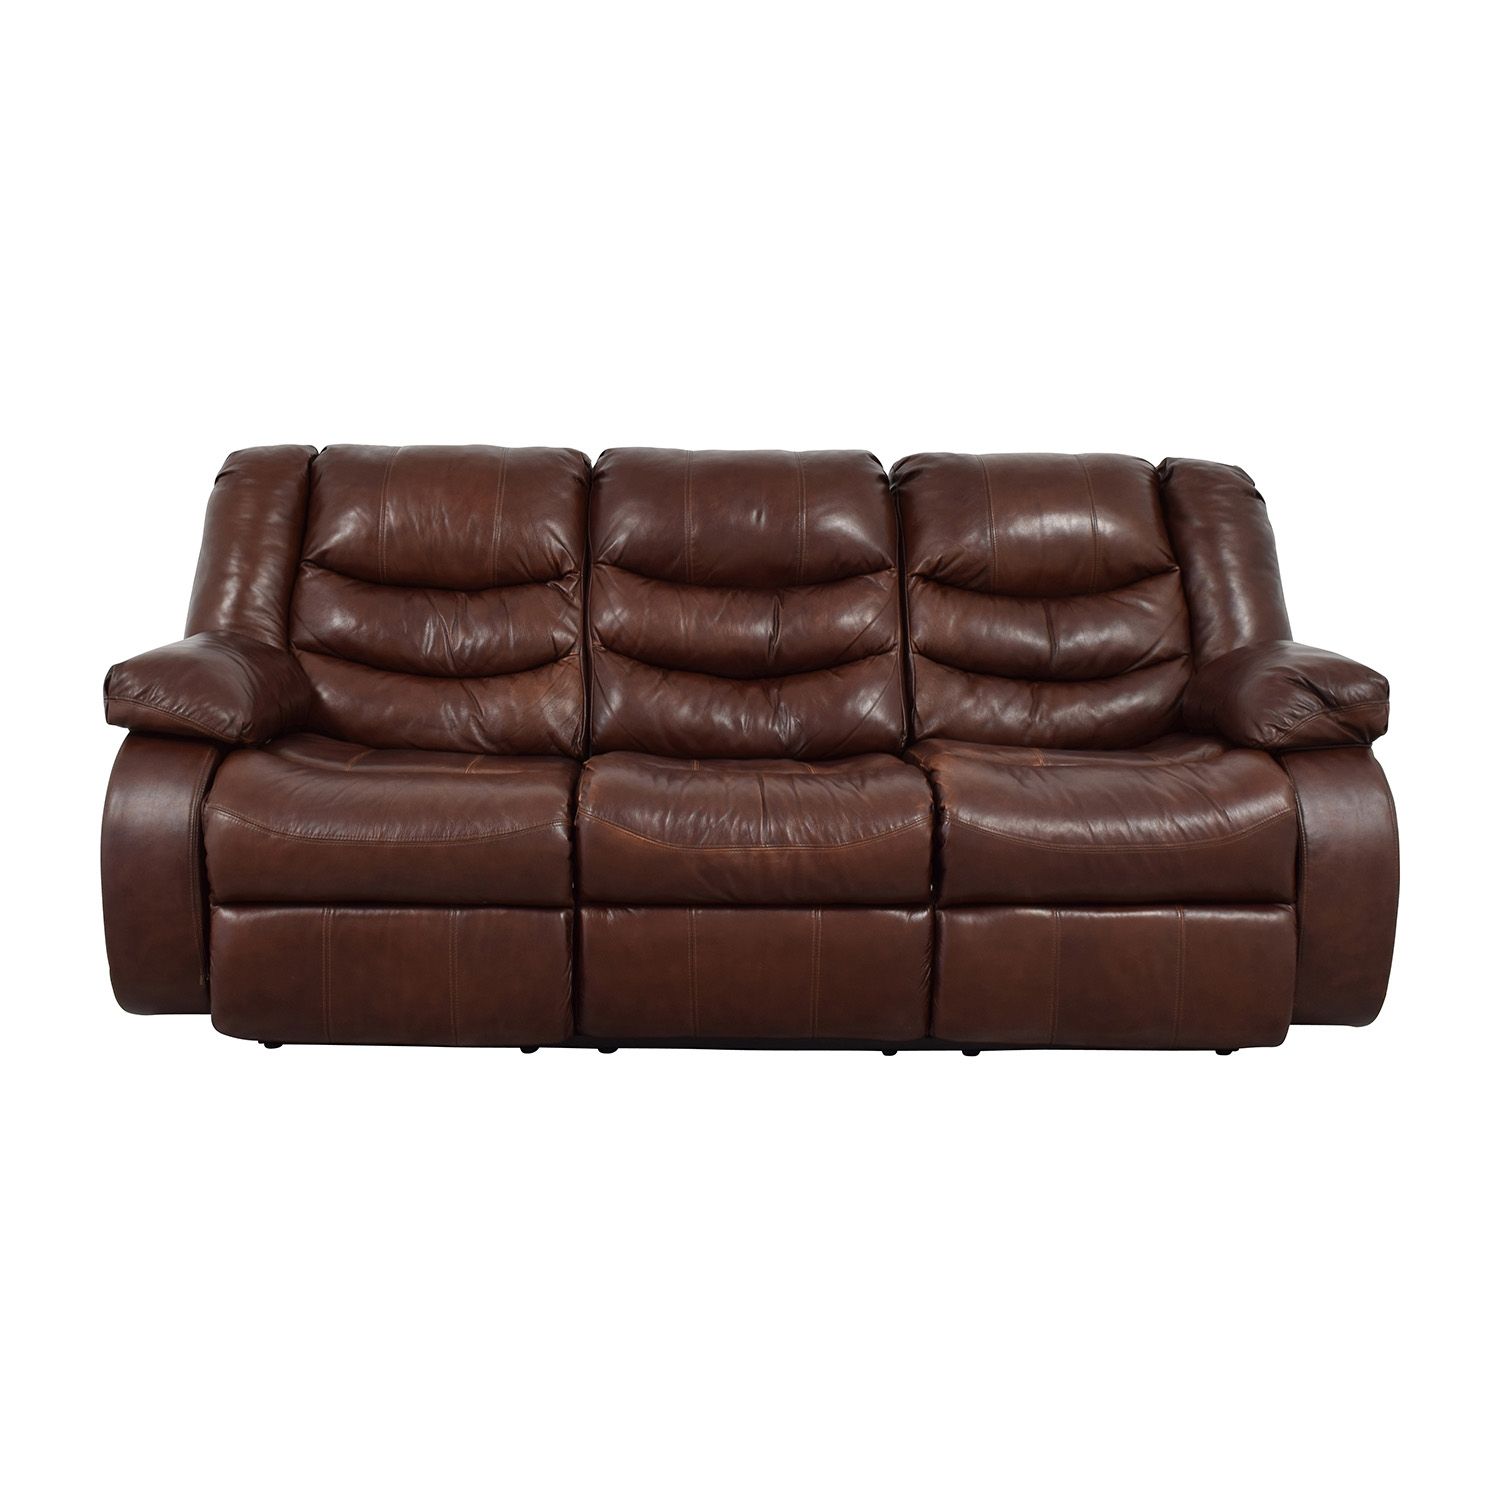 Classic Sofas Used Classic Sofas For Sale With Regard To Classic Sofas For Sale (View 13 of 15)